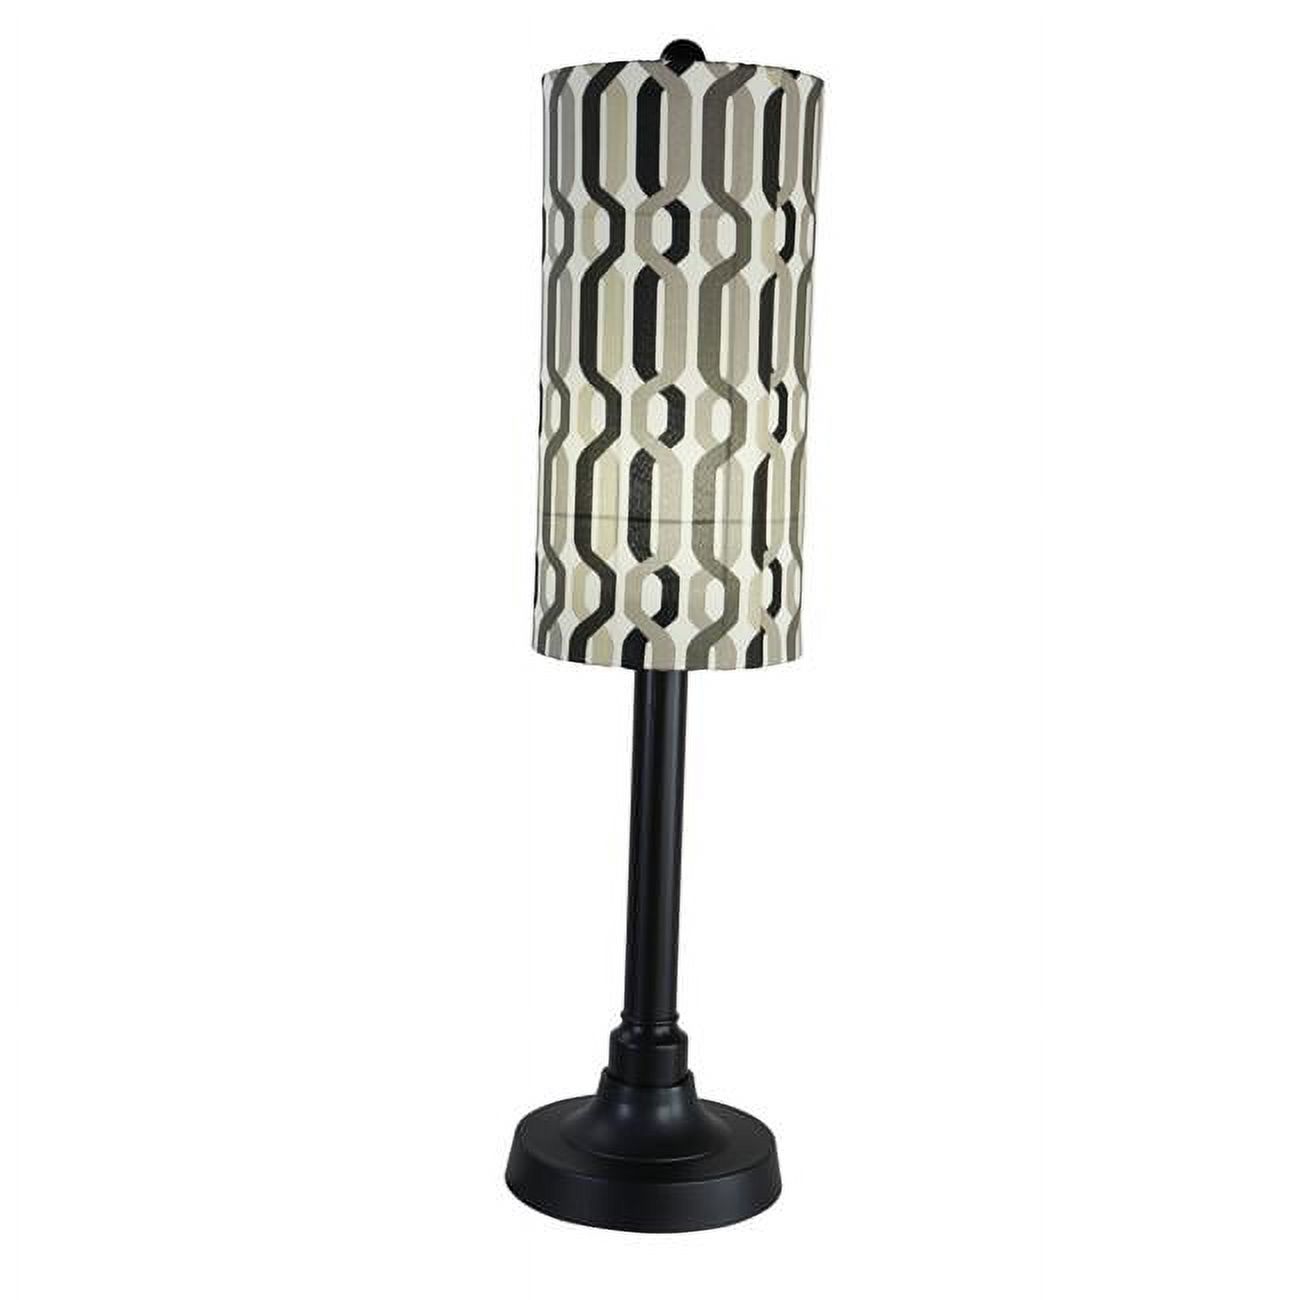 Patio Living Coronado 42" Table Lamp 62190 with 2" black body and New Twist Caviar outdoor fabric shade - image 1 of 1